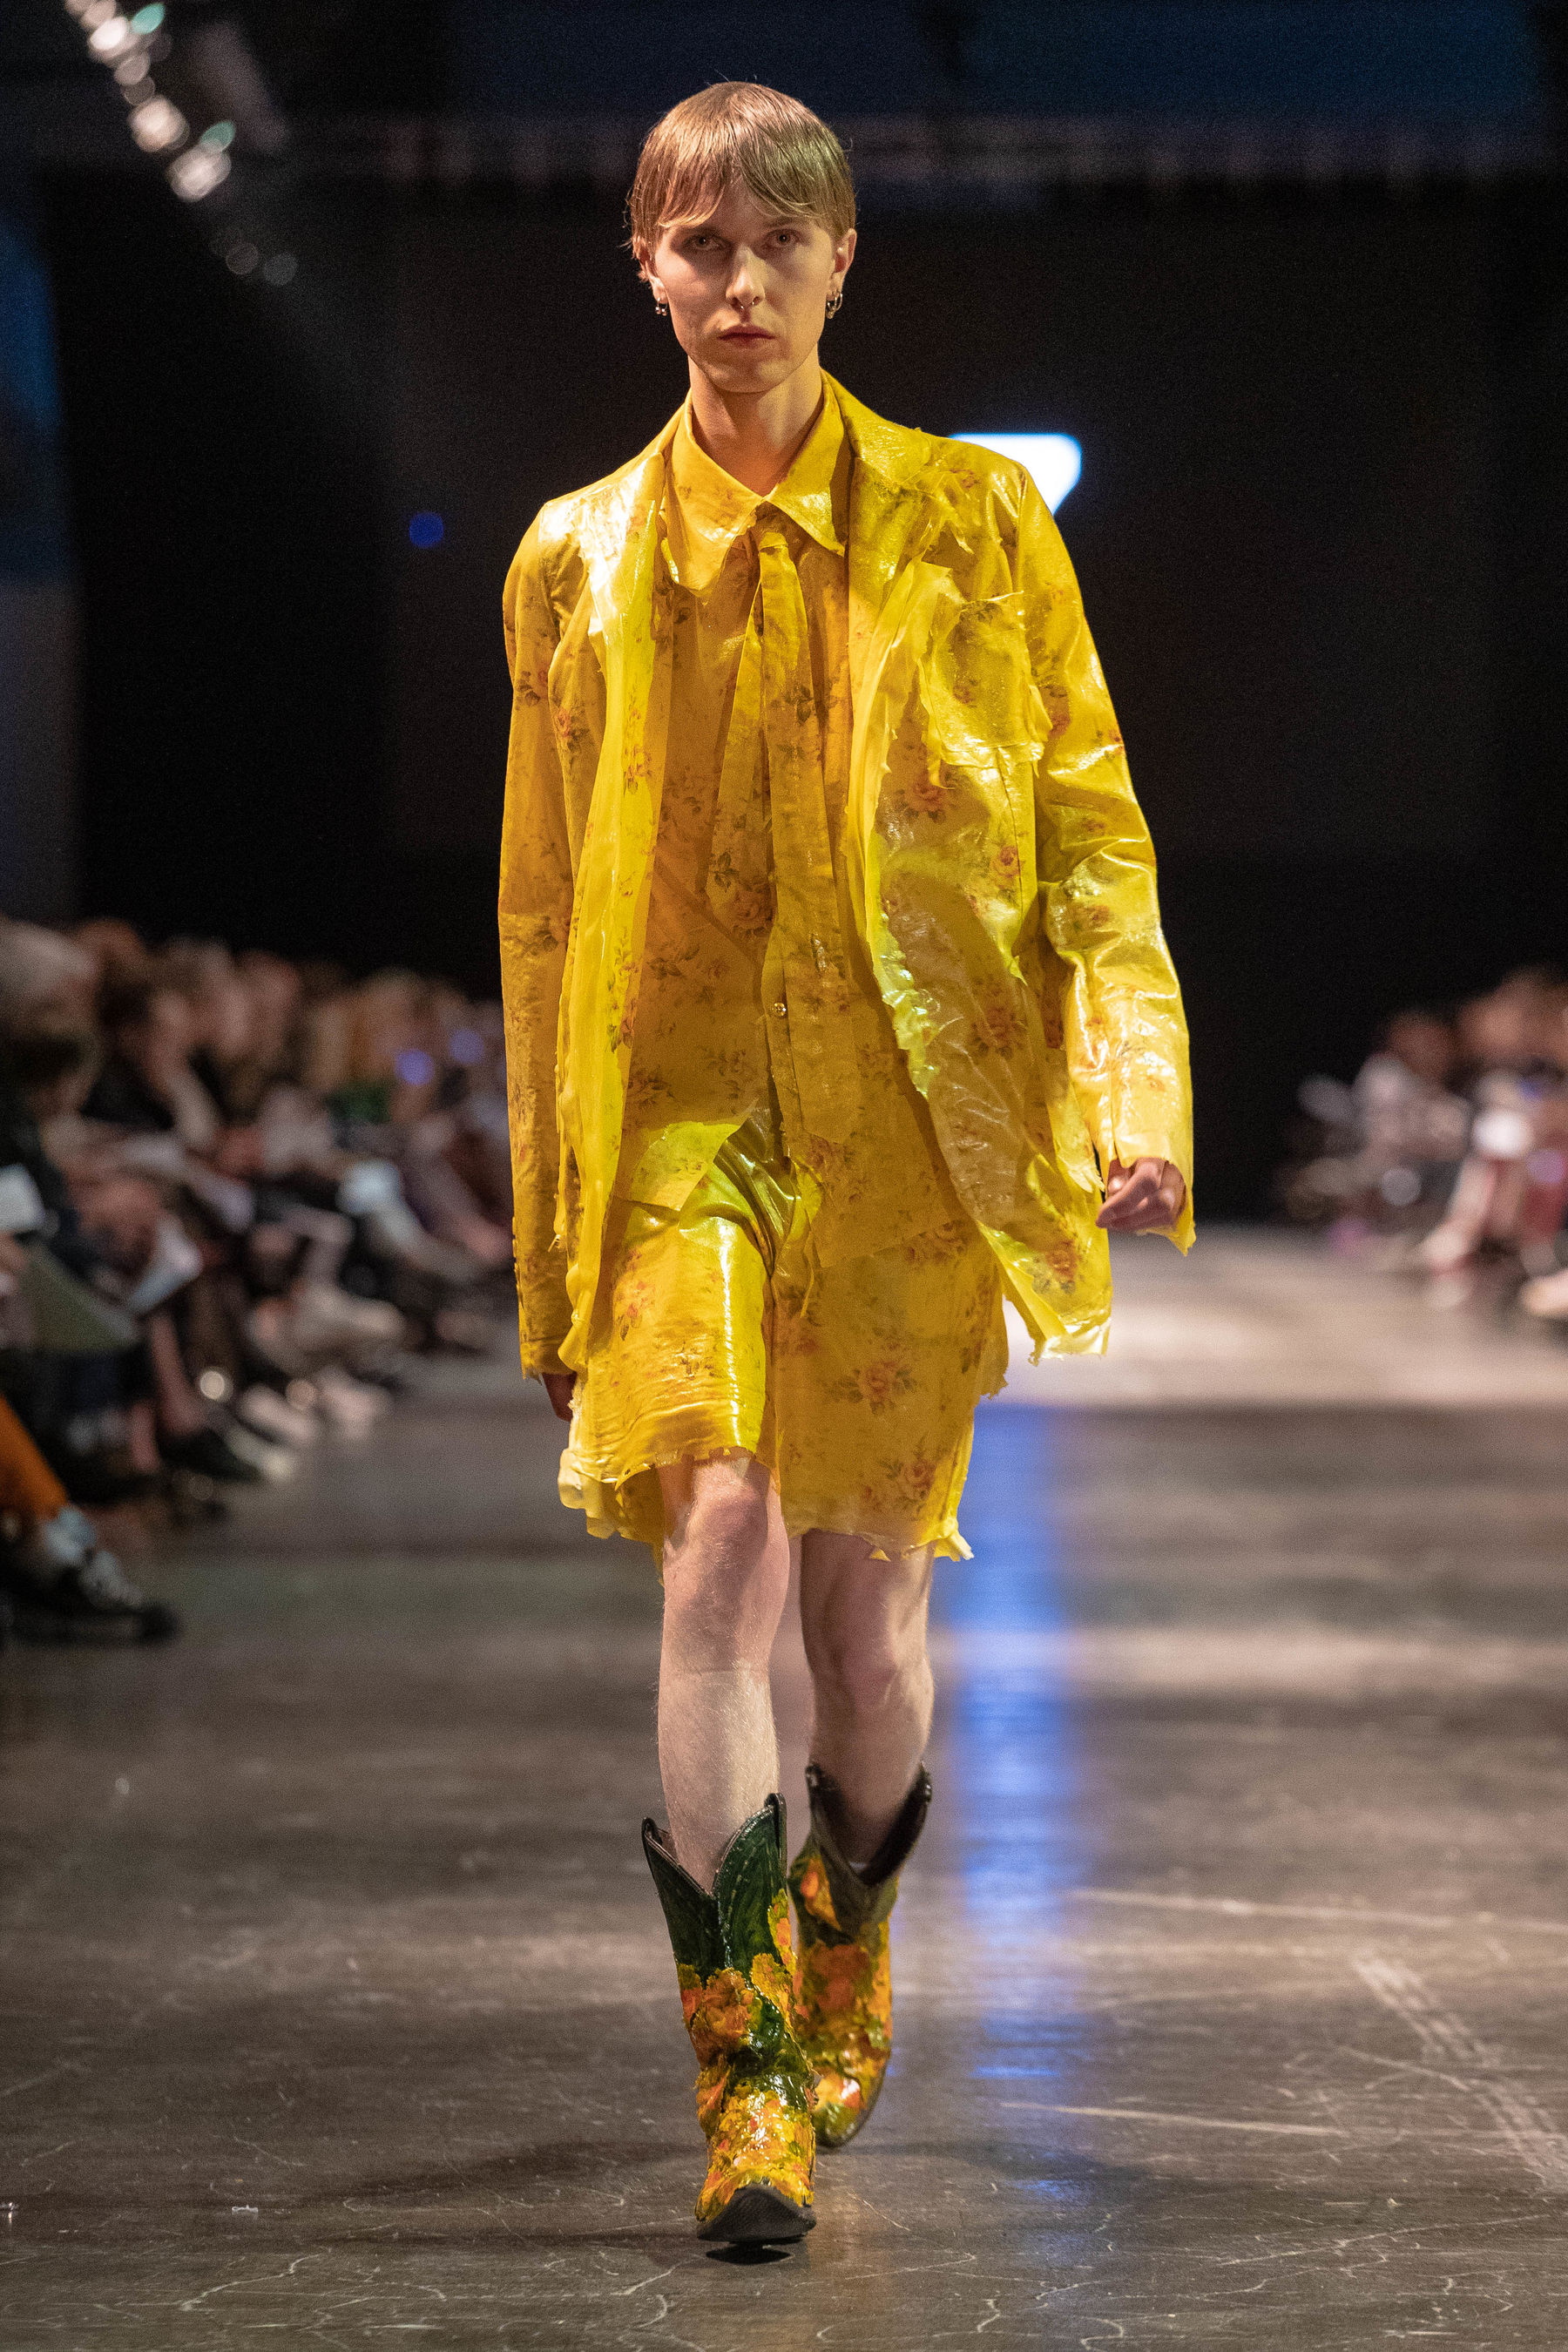 model on runway in yellow suit with shorts